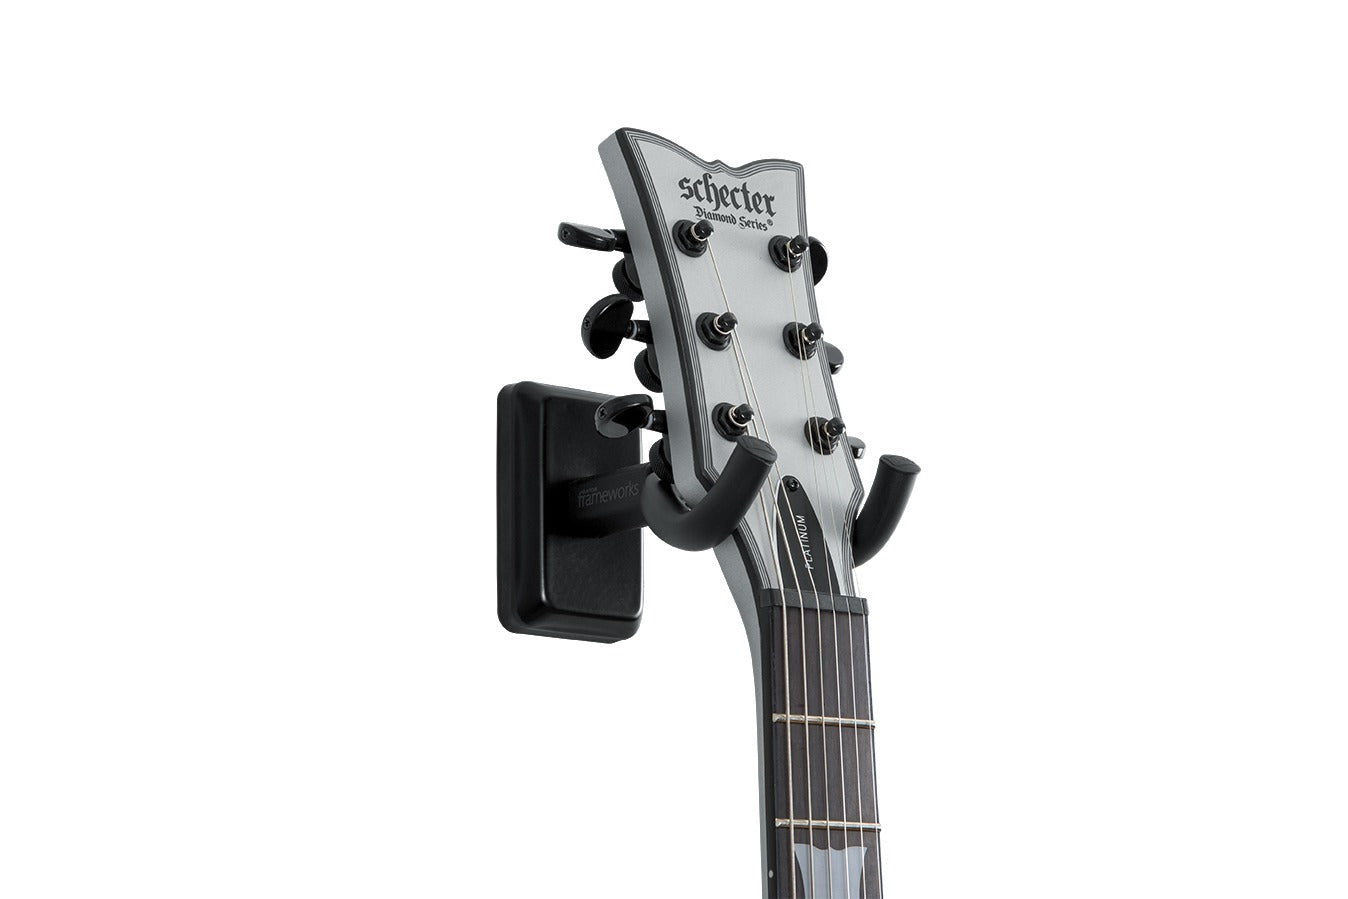 Frameworks GFWGTRHNGBLK Wall Mounted Guitar Hanger with Black Mounting Plate